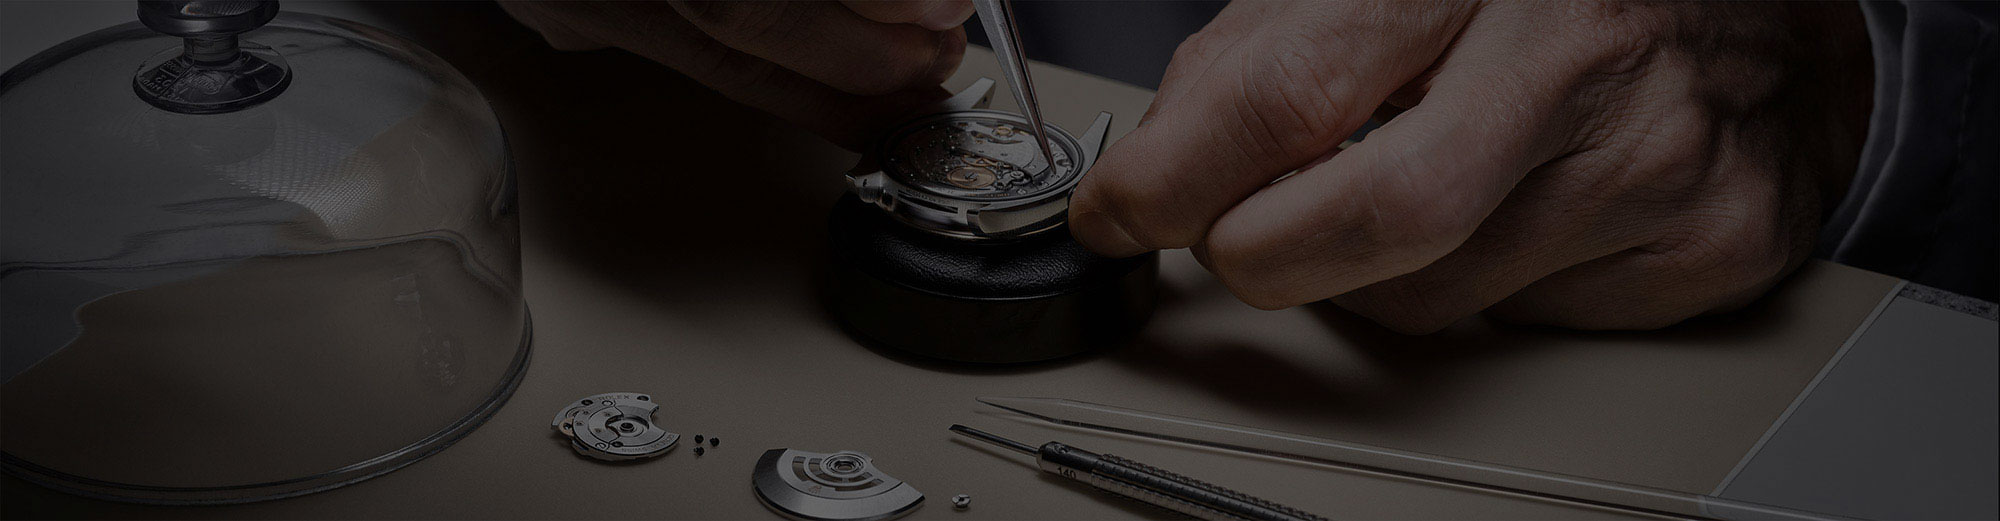 ROLEX WATCH SERVICING AND REPAIR AT ROLEX BOUTIQUE GEARYS RODEO DRIVE